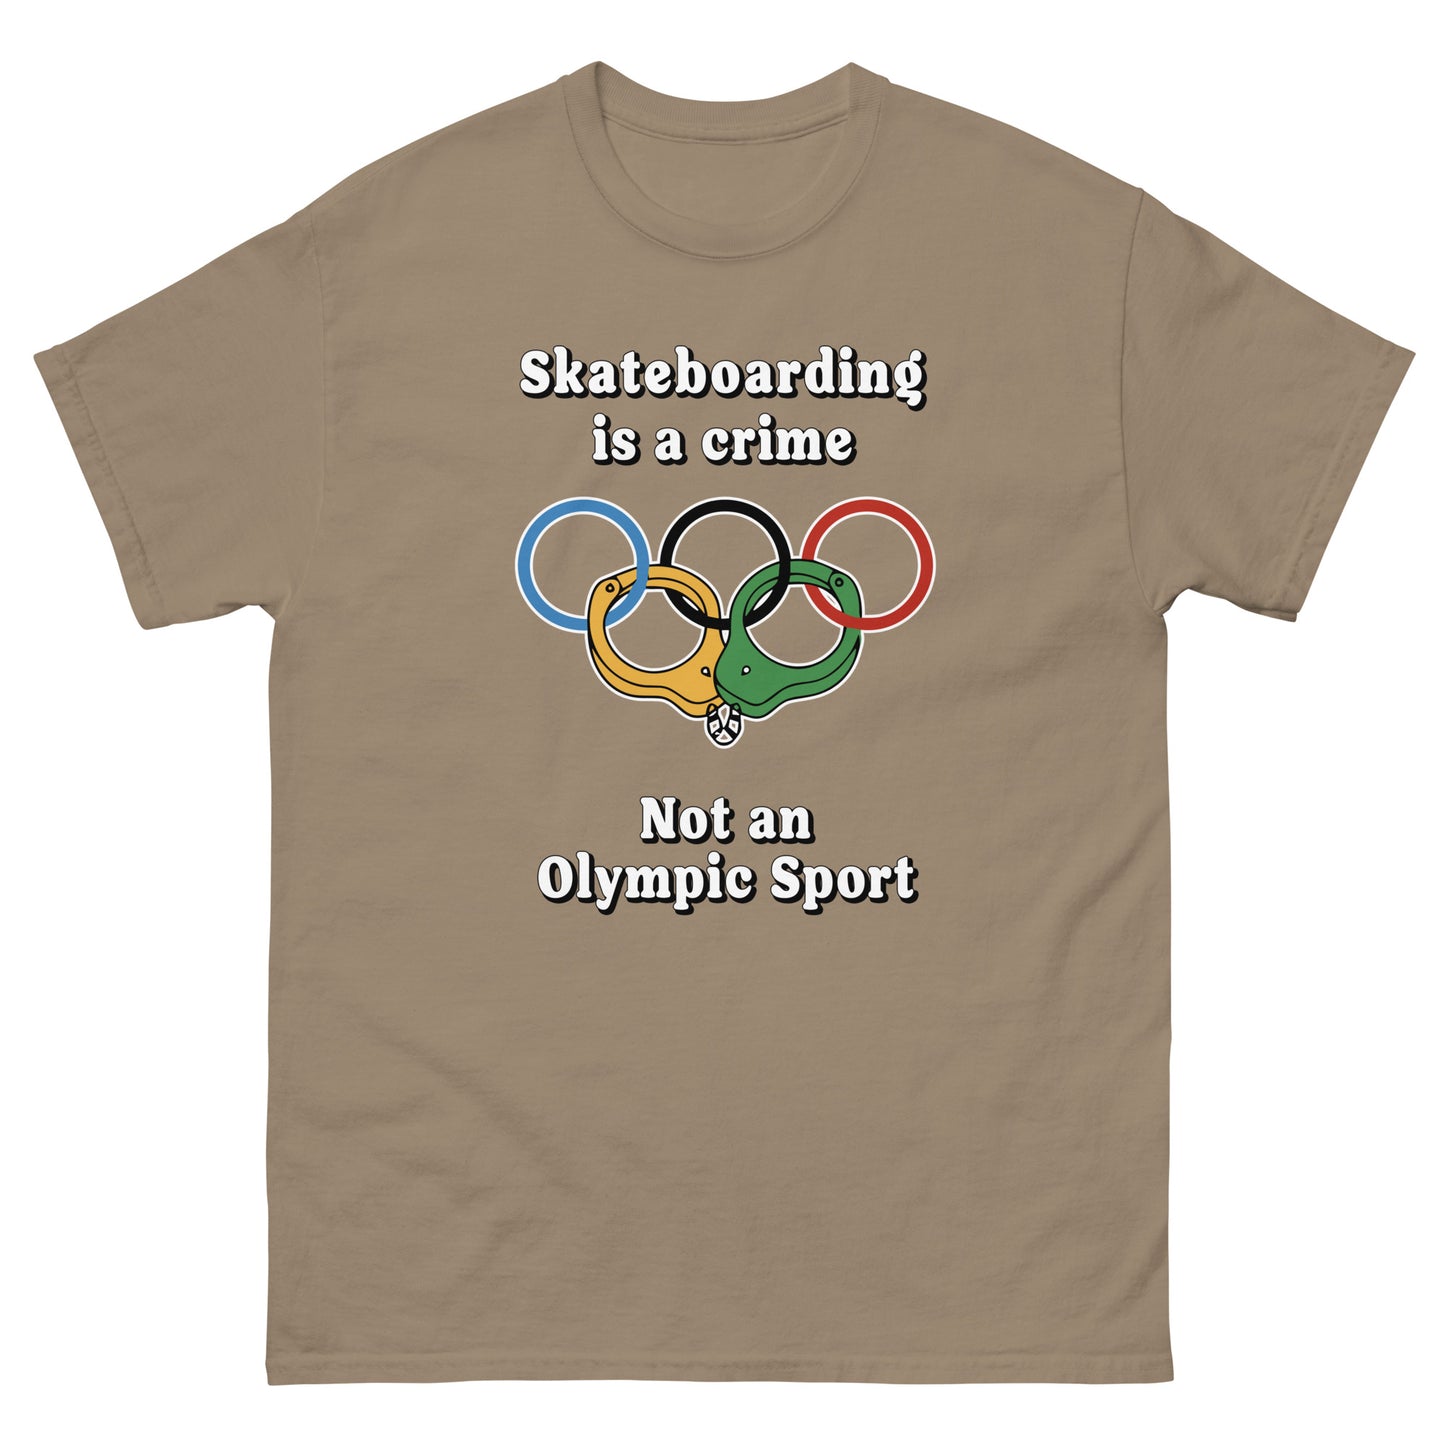 Skateboarding is a crime not an olympic sport design printed on a t-shirt by Whistler Shirts